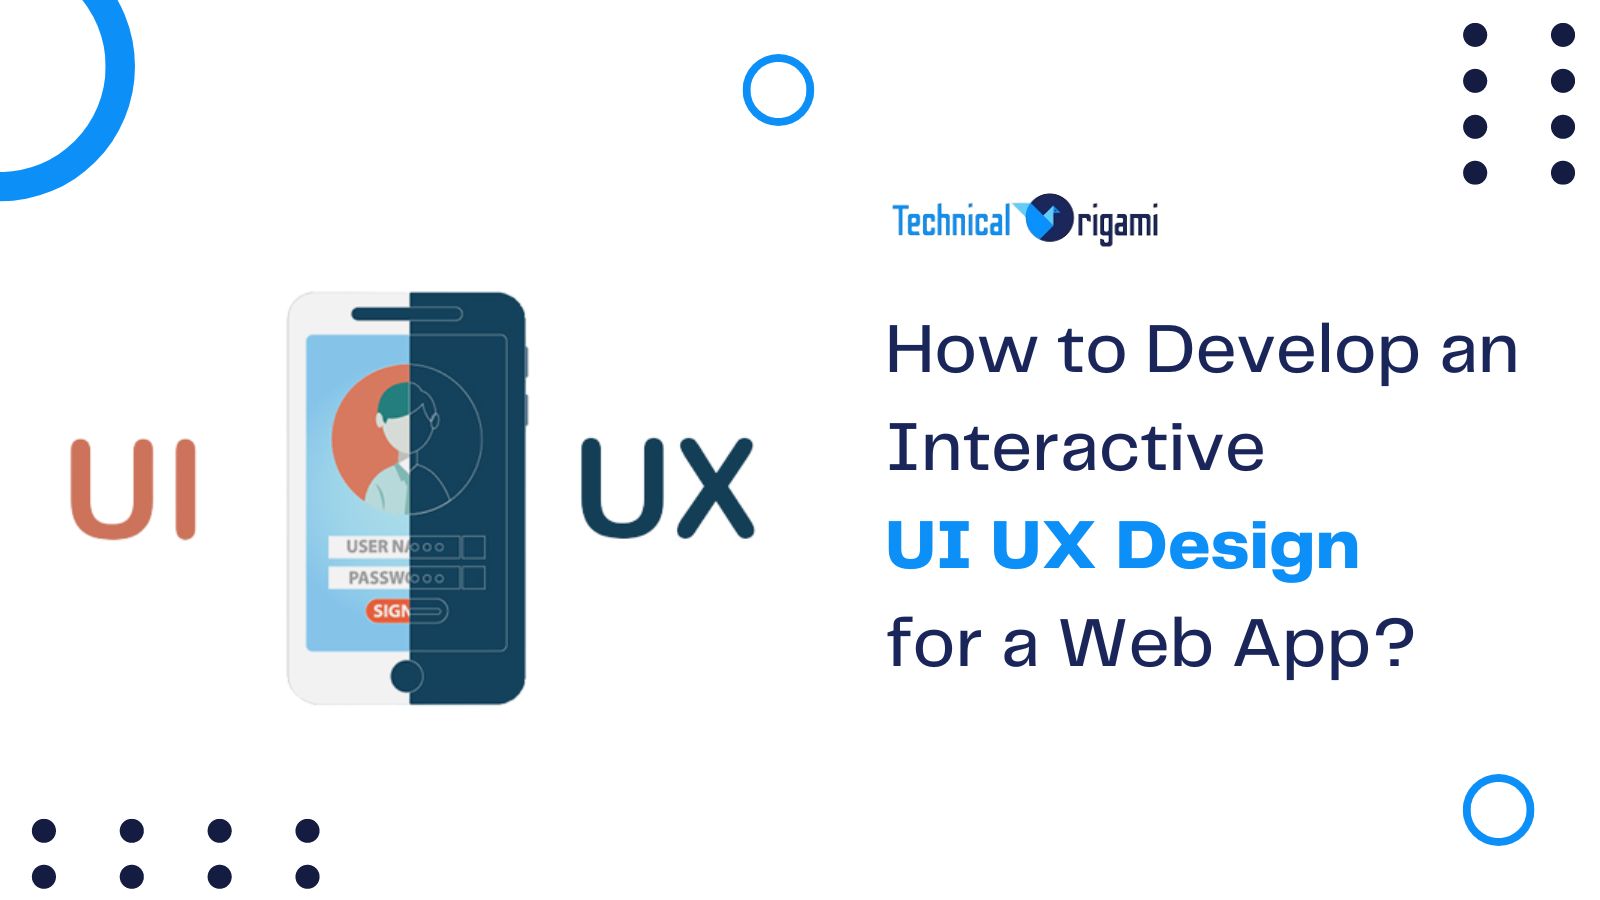 How to Develop an Interactive UI UX Design for a Web App?